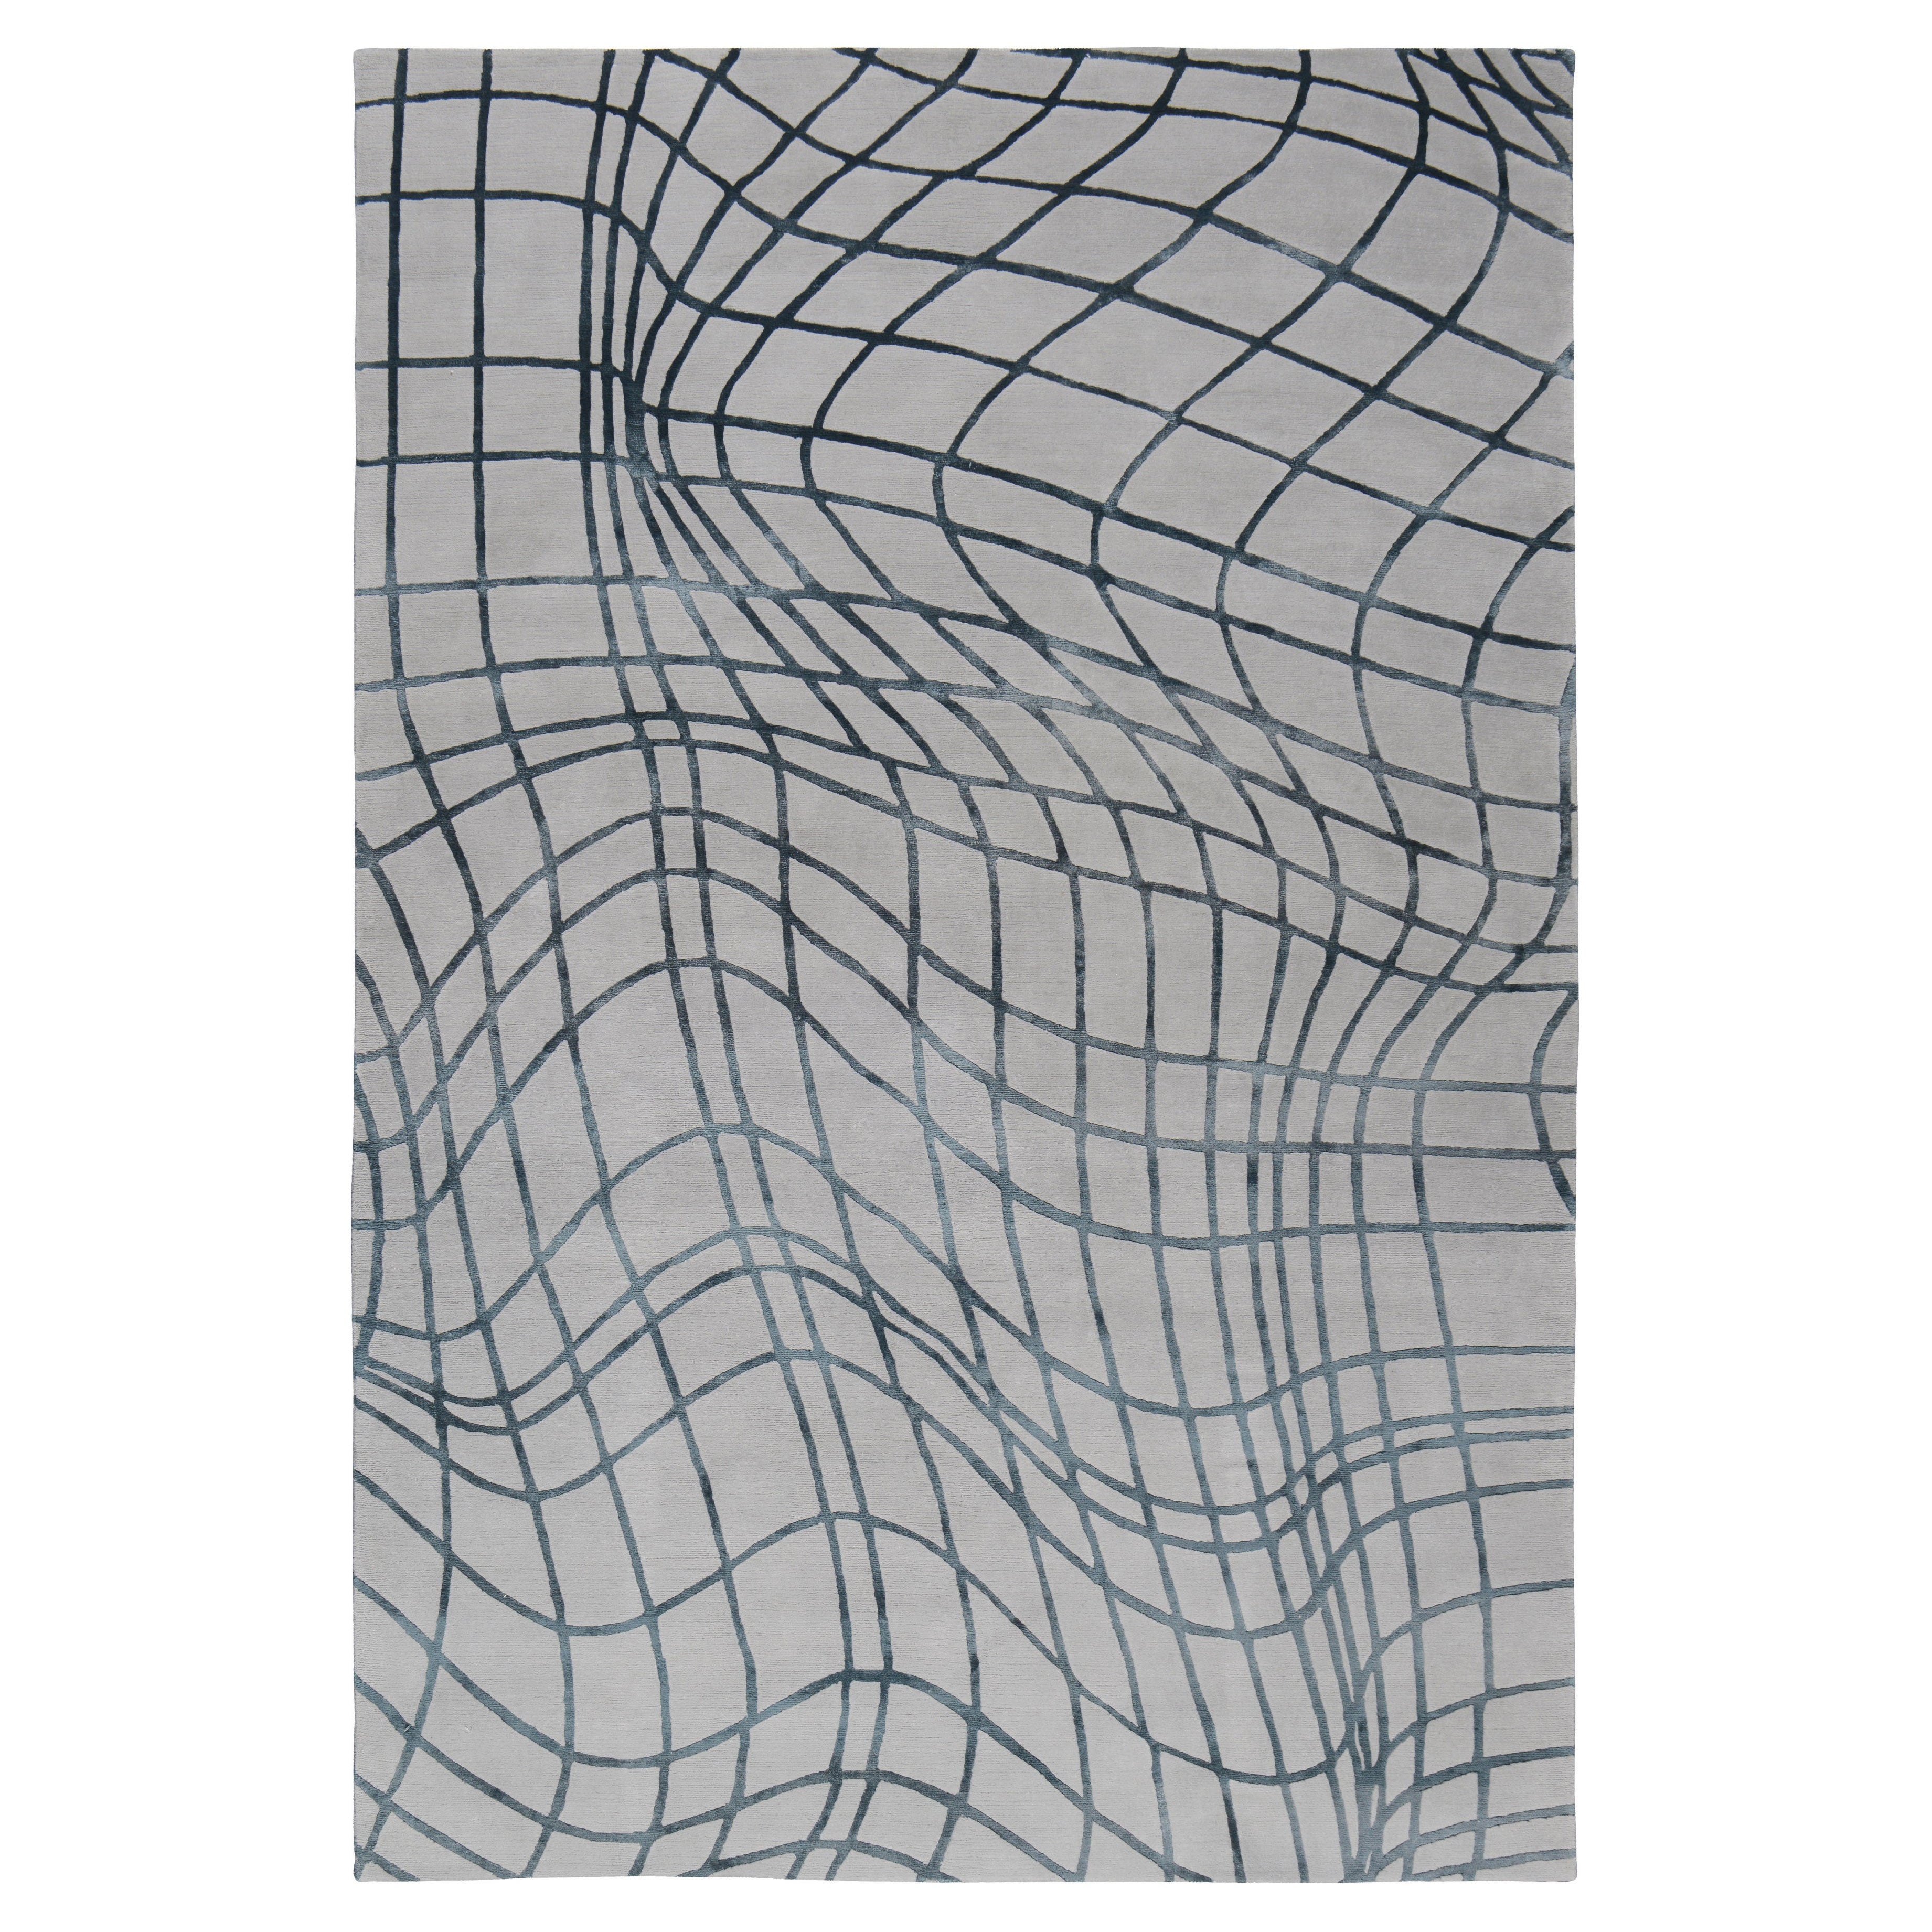 Wavelength features a distorted grid motif inspired by a 3D graph. The rug transforms the abstract lines into a bold motif, perfect for adding intrigue to a space. Woven by our expert craftspeople in Nepal using the finest wool and silk.